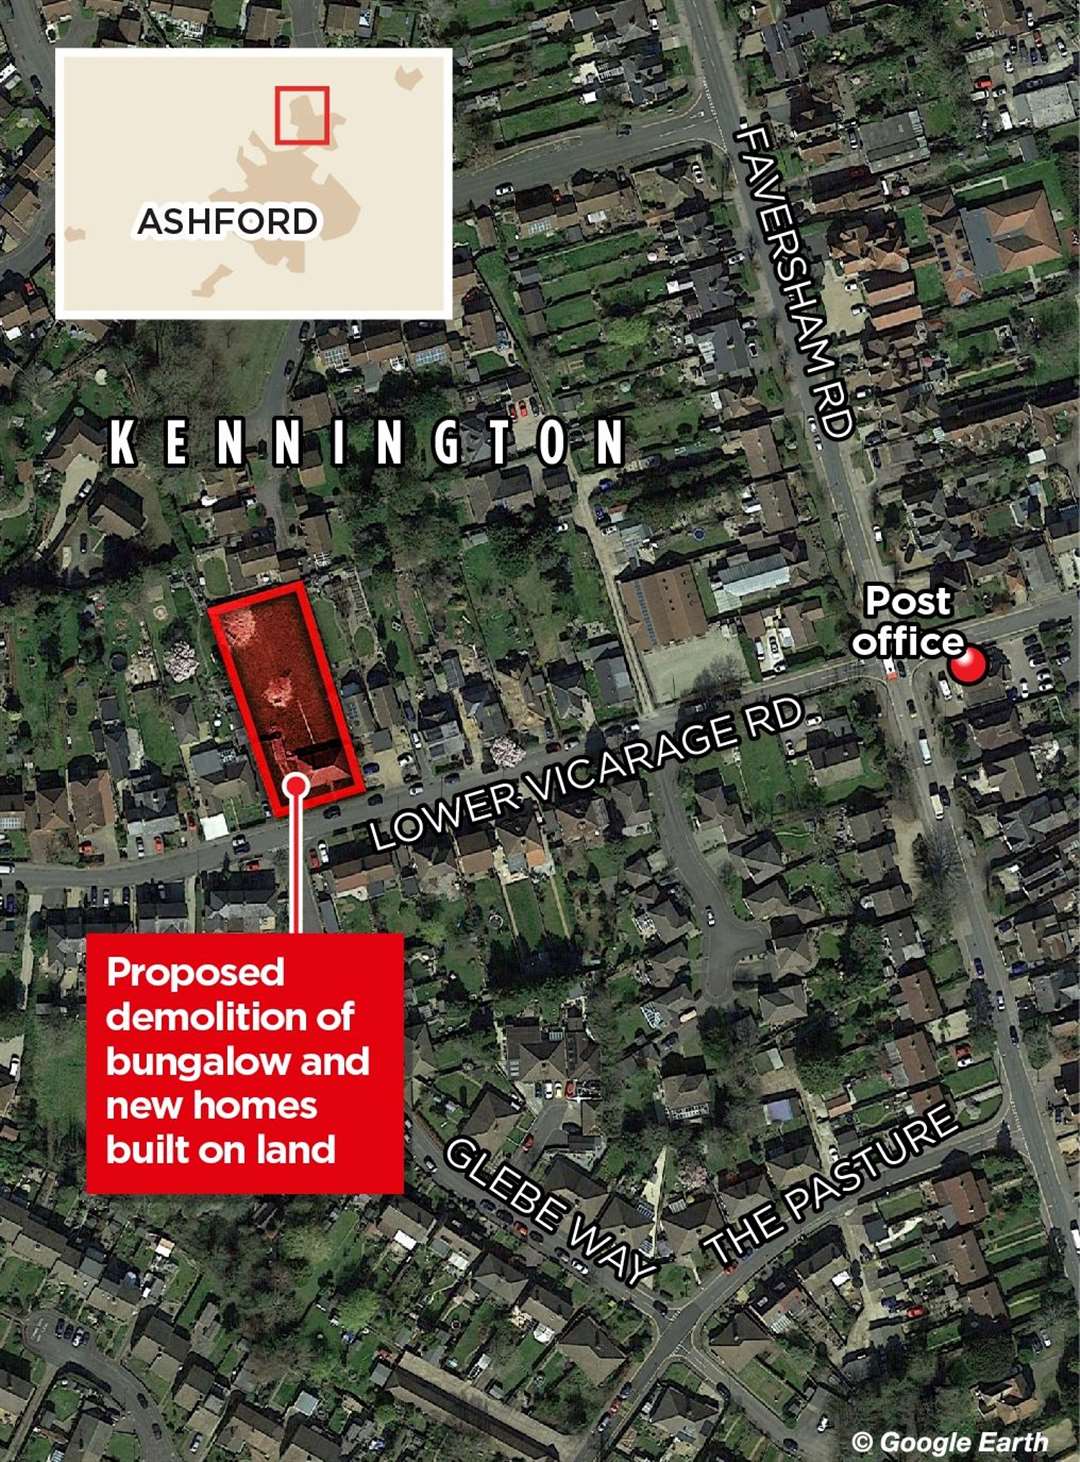 The site is in Lower Vicarage Road, opposite Glebe Way in Kennington